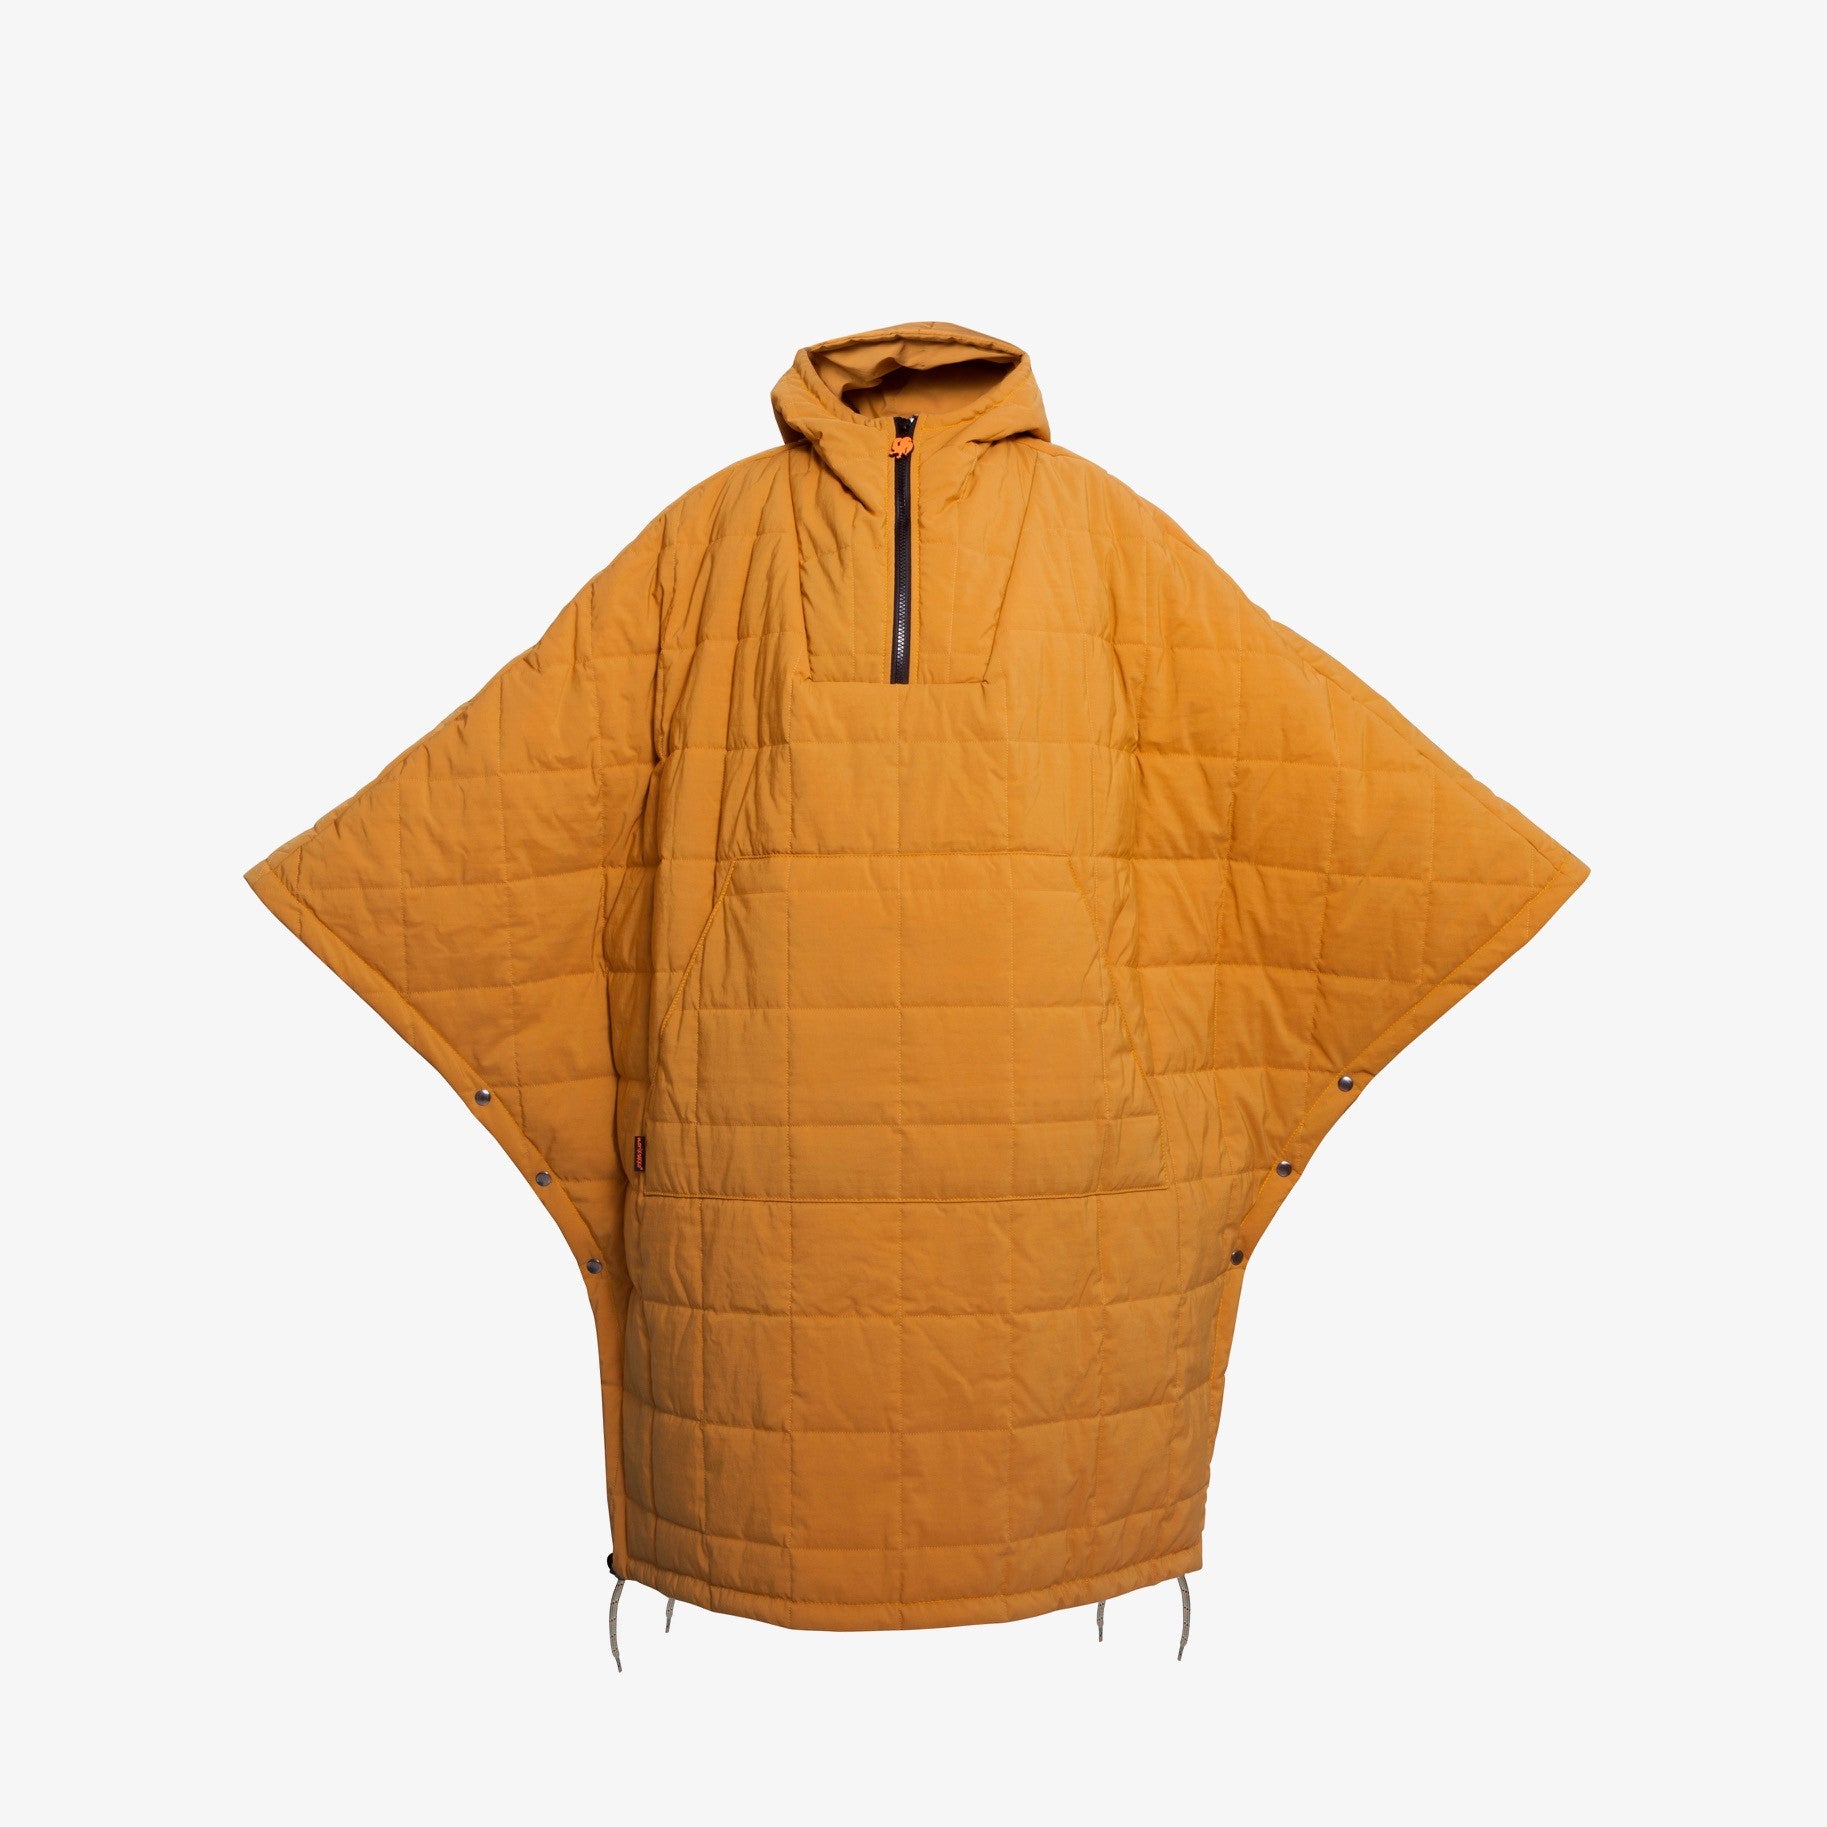 NEW! BLANCAPE - Multi-functional Water-repellent Warm Jacket